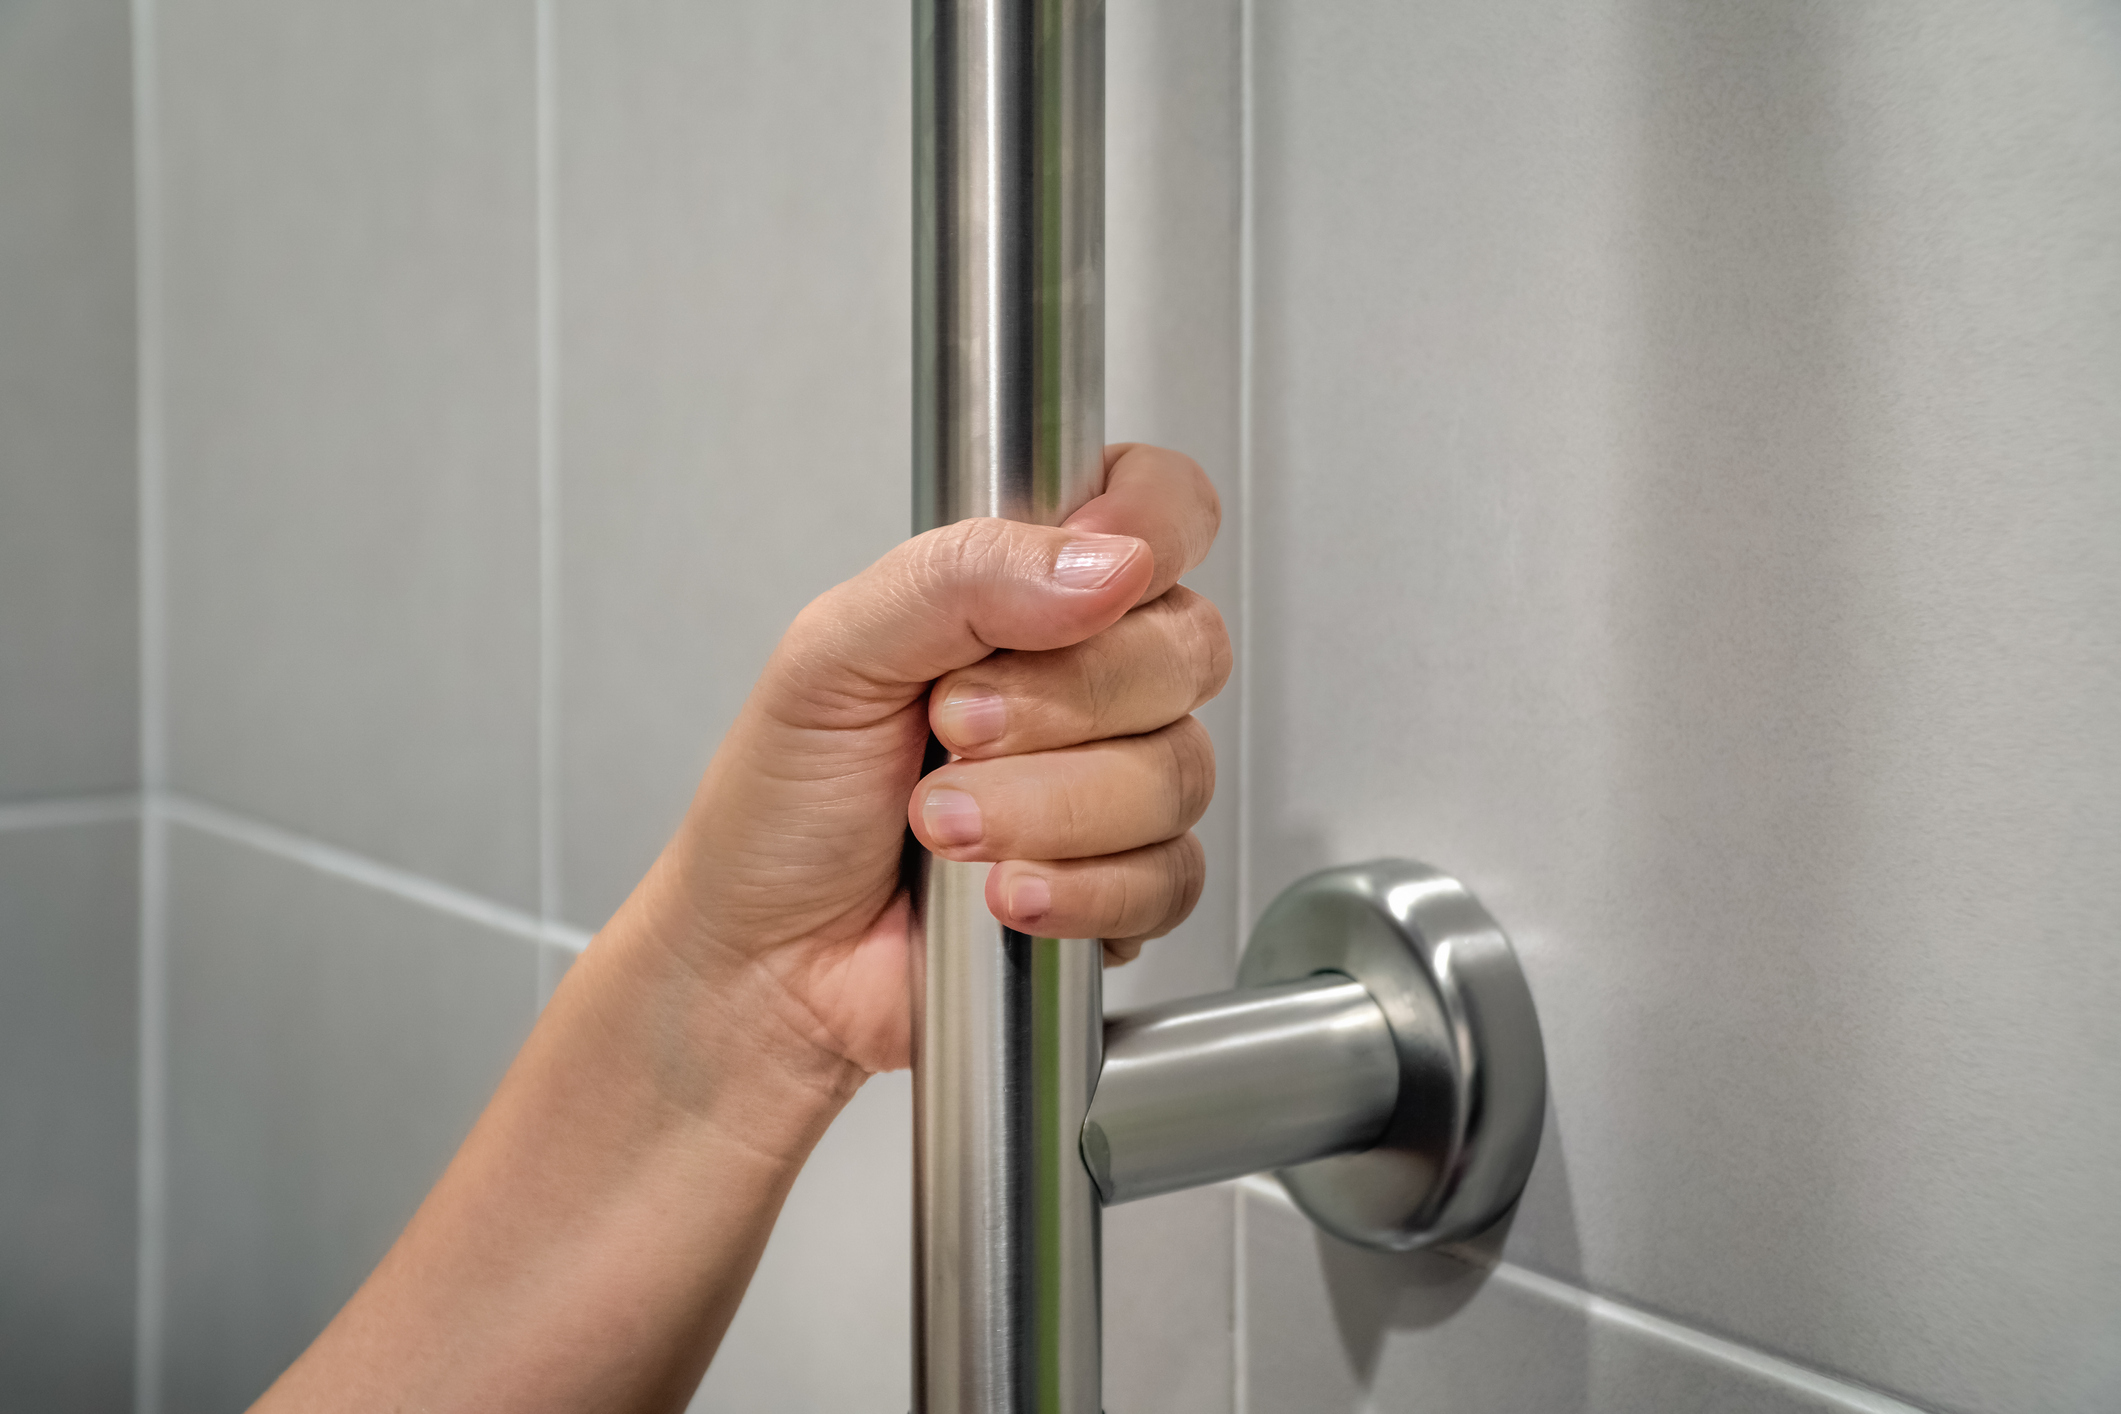 Close up image of someone holding onto a vertical grab bar to pull themselves up